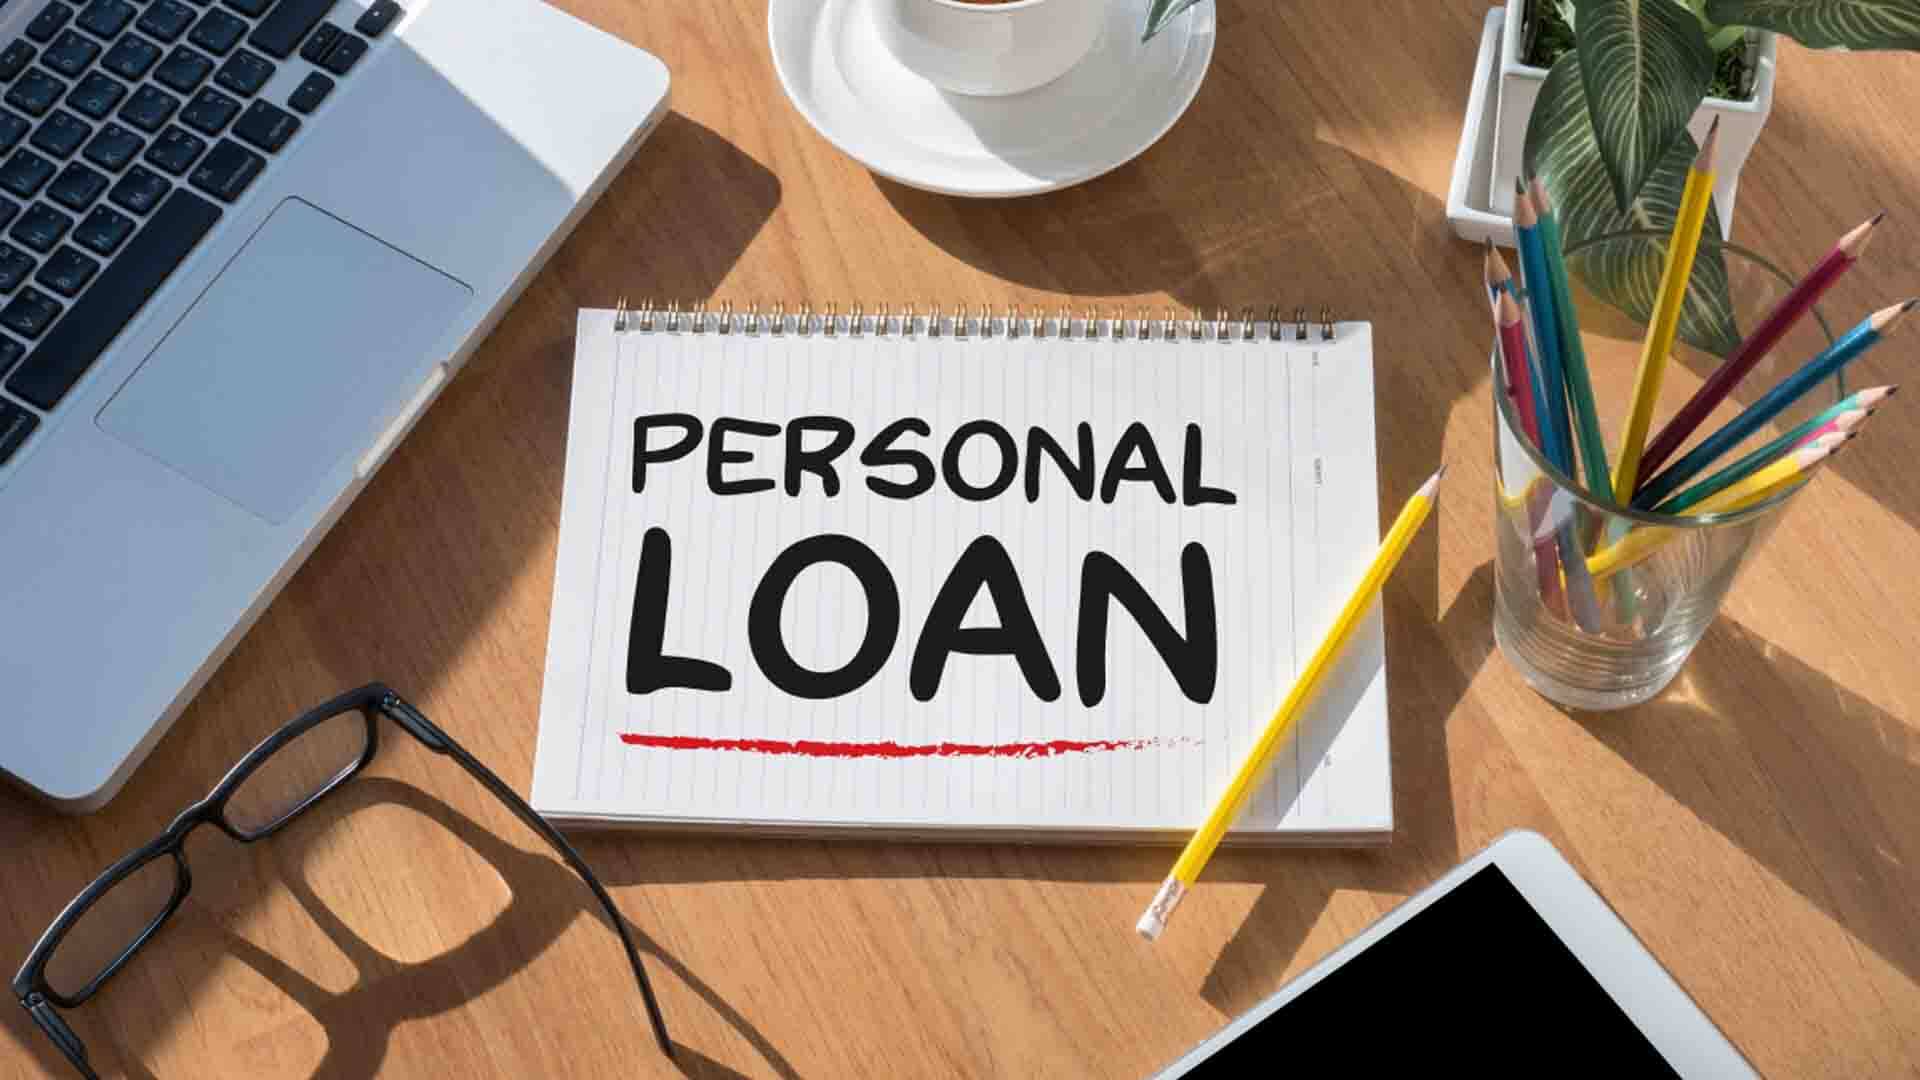 How to get a personal loan?